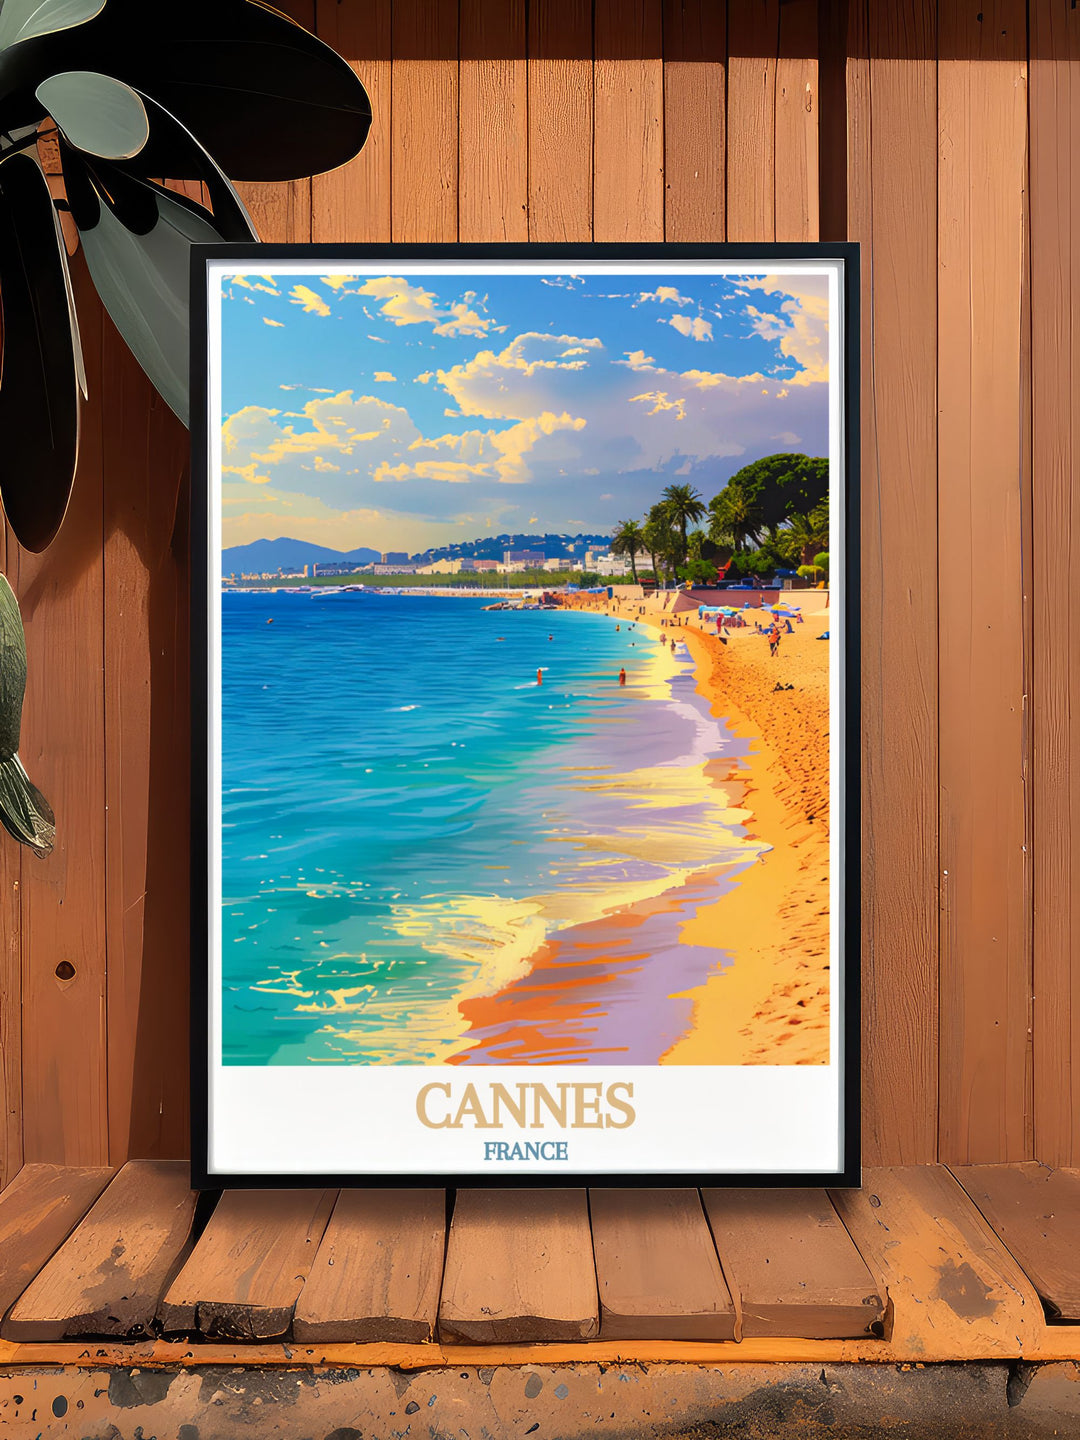 Beautiful Plage de la Croisette home decor capturing the serene energy of Cannes this France art print is an elegant addition to any interior perfect for those who appreciate France travel art and wish to bring a piece of French elegance into their home